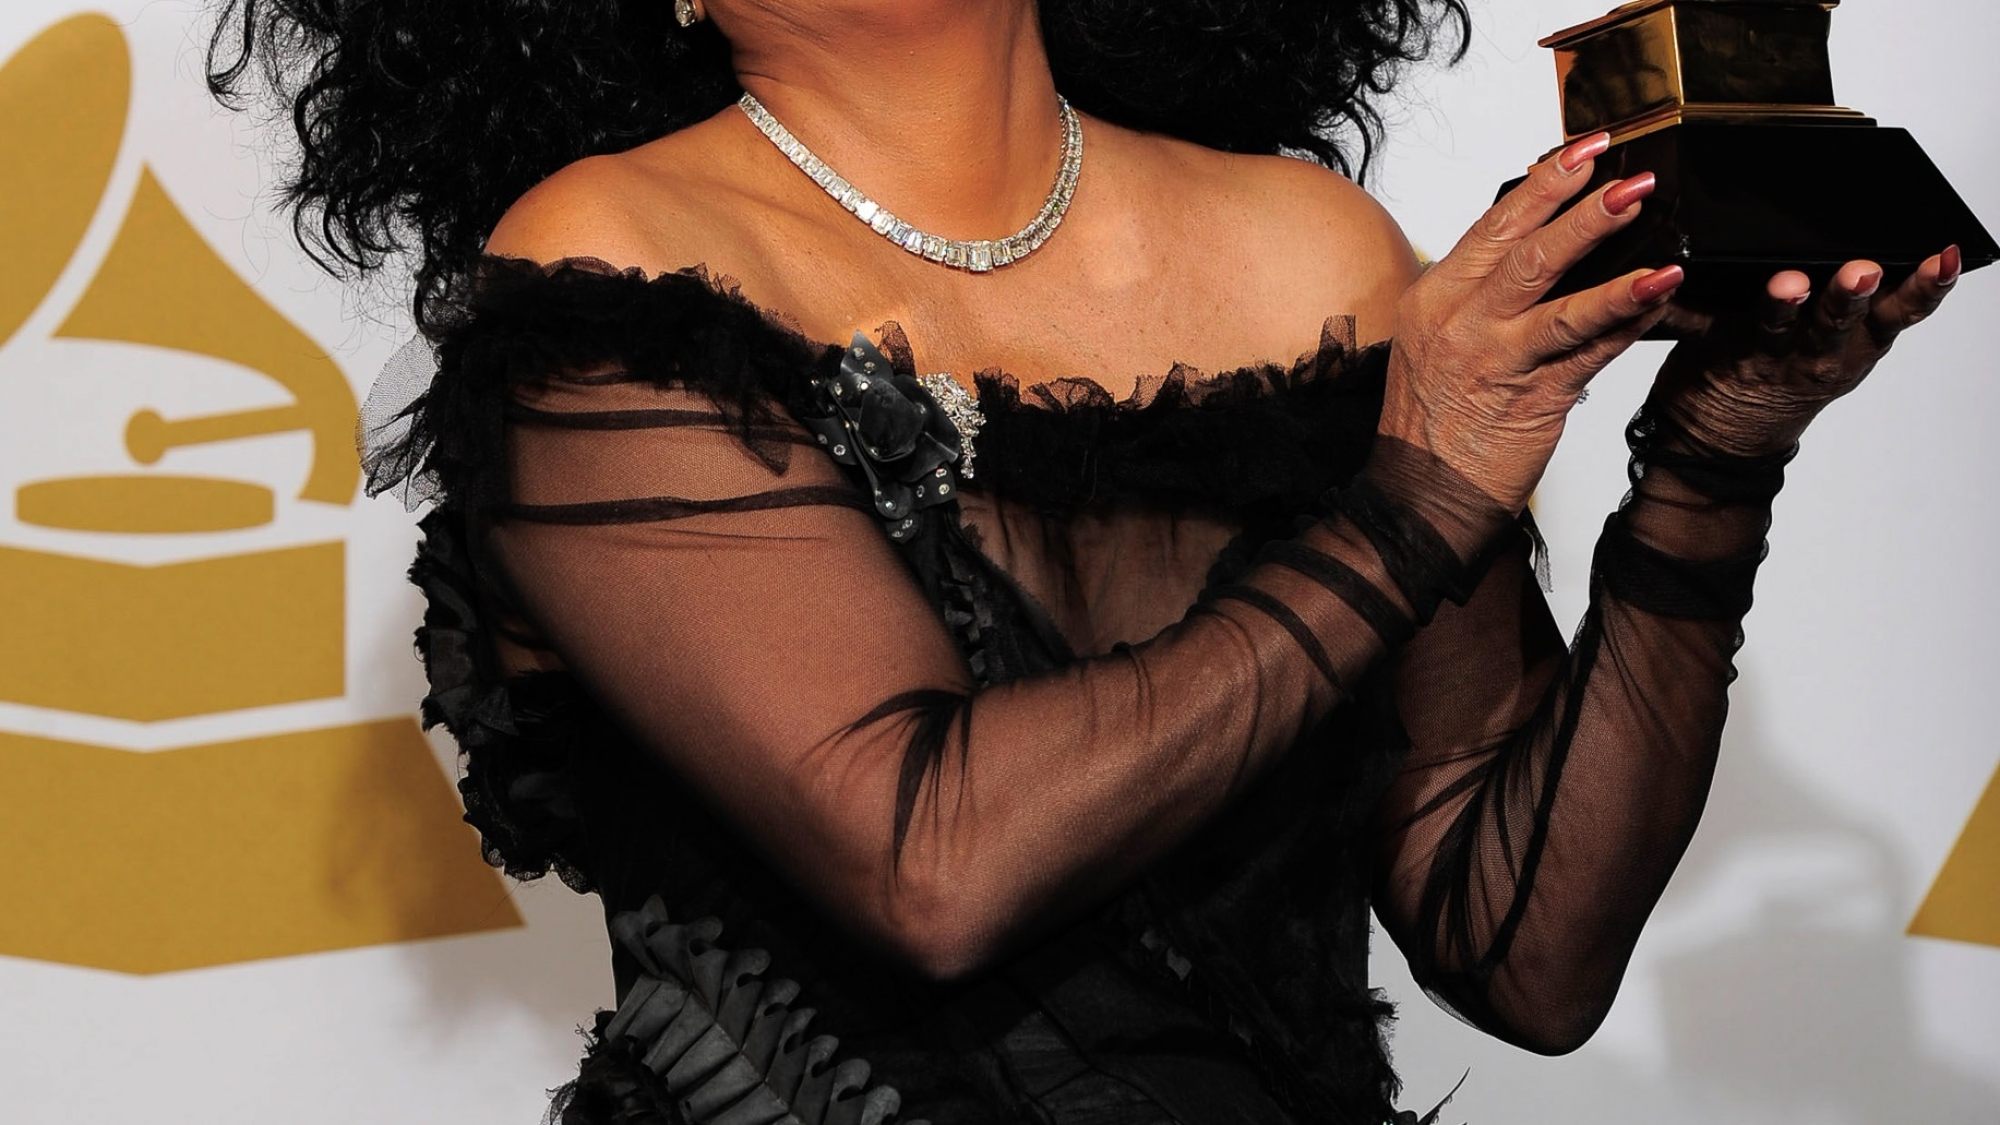 Diana Ross poses backstage with her Lifetime Achievement award at the 54th annual Grammy Awards on Sunday, Feb. 12, 2012 in Los Angeles. (AP Photo/Mark J. Terrill)